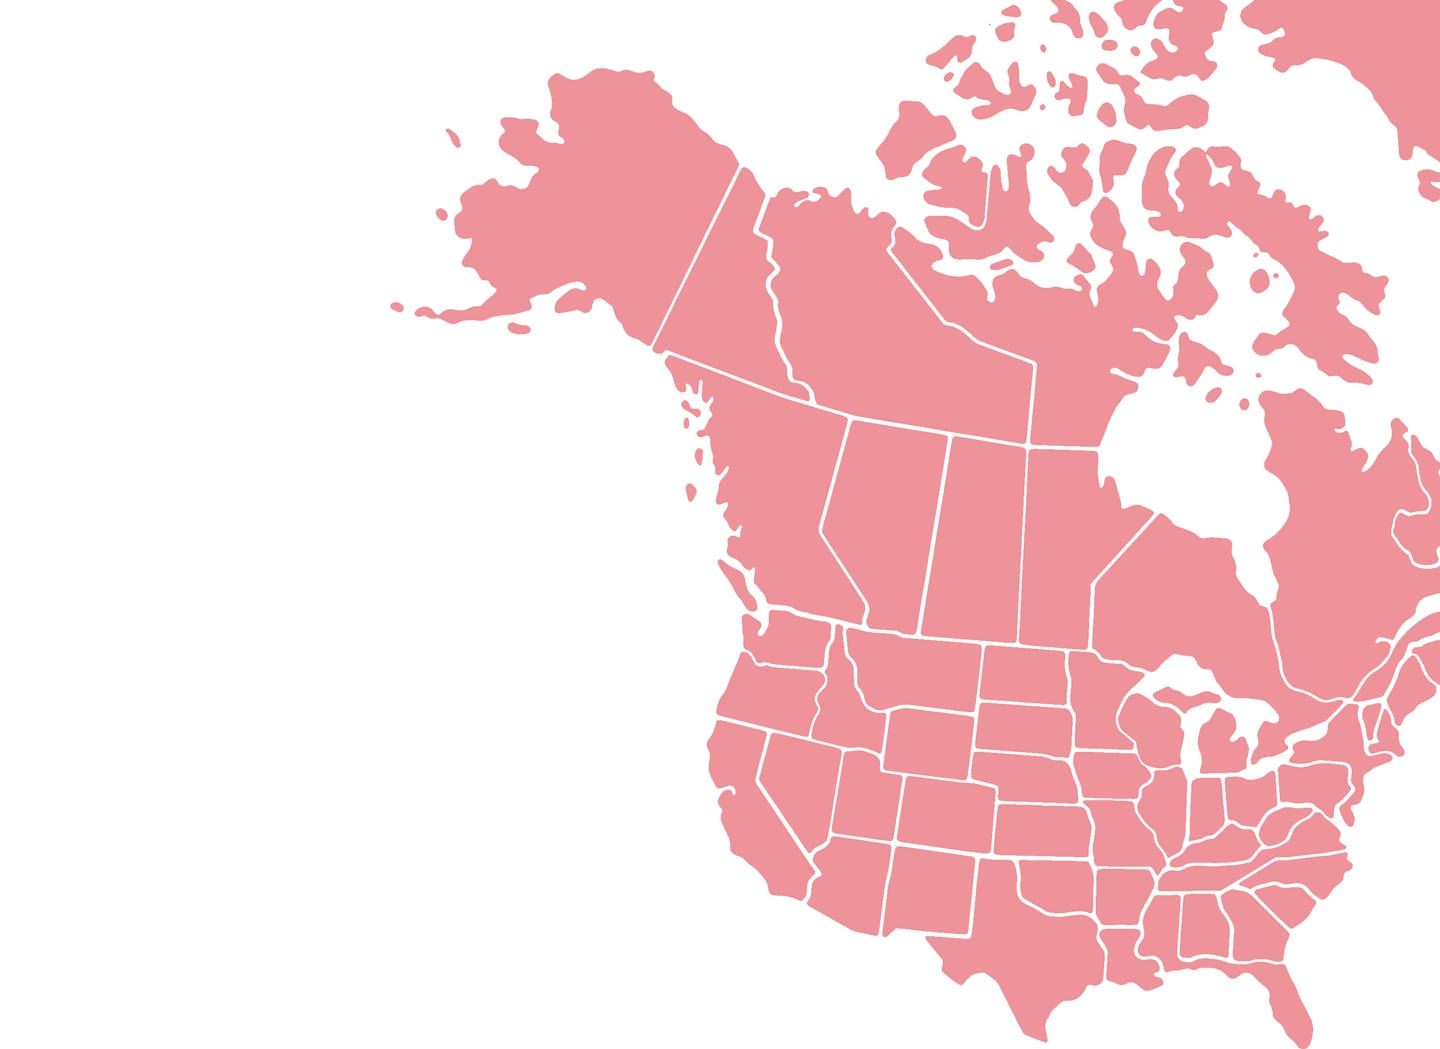 United States &amp; Canada highlighted in red